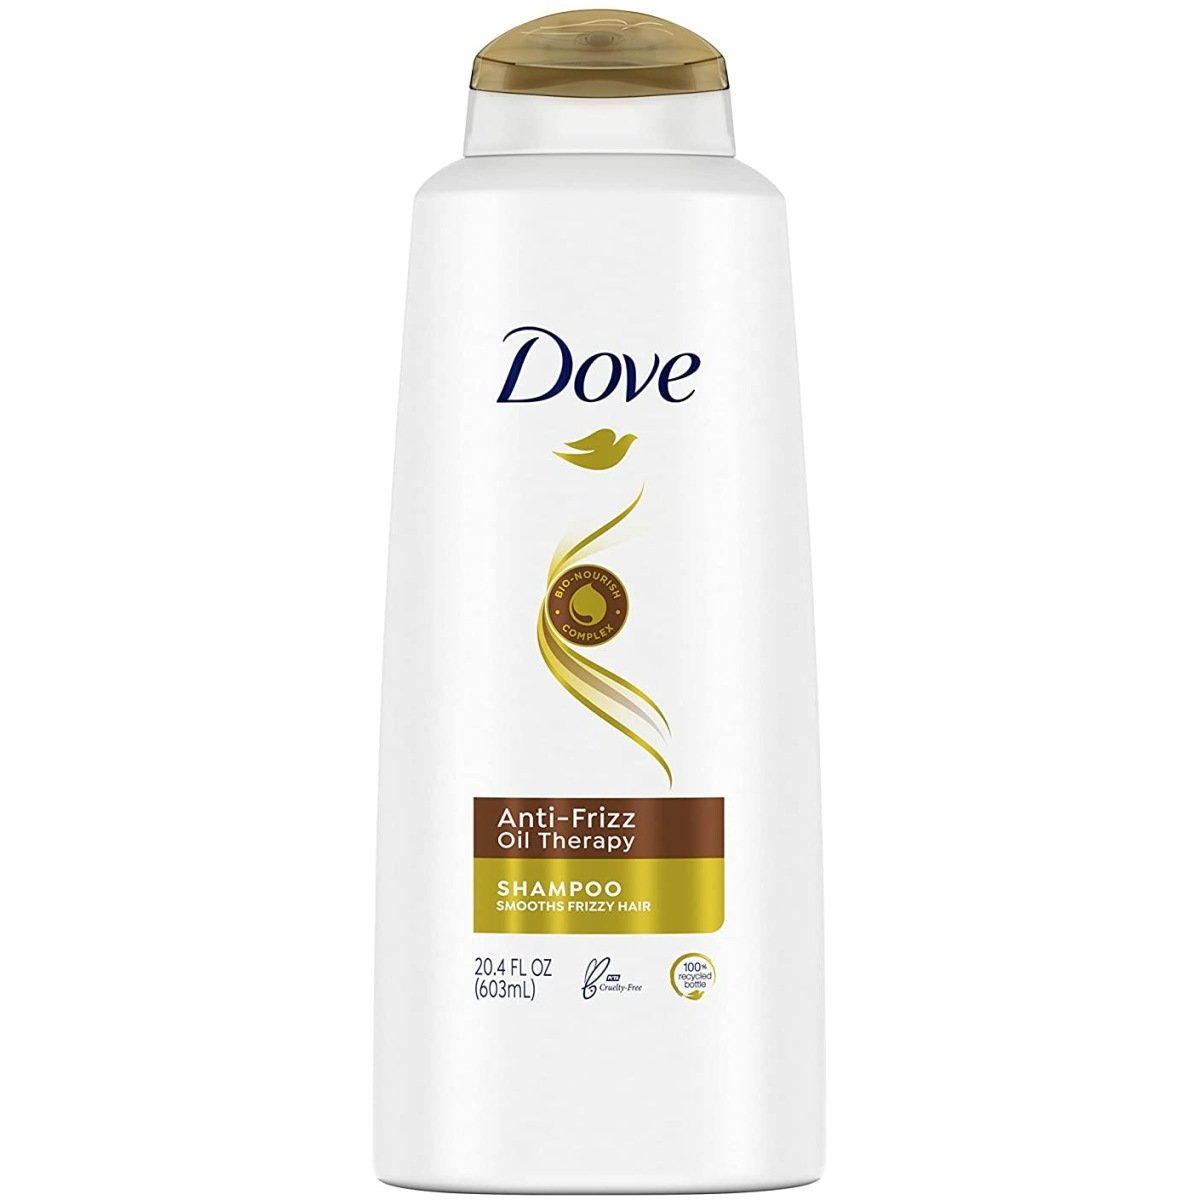 Dove Shampoo for Dry Hair Anti-Frizz Oil Therapy With Nutri-Oils to Treat Frizzy Hair 603ML